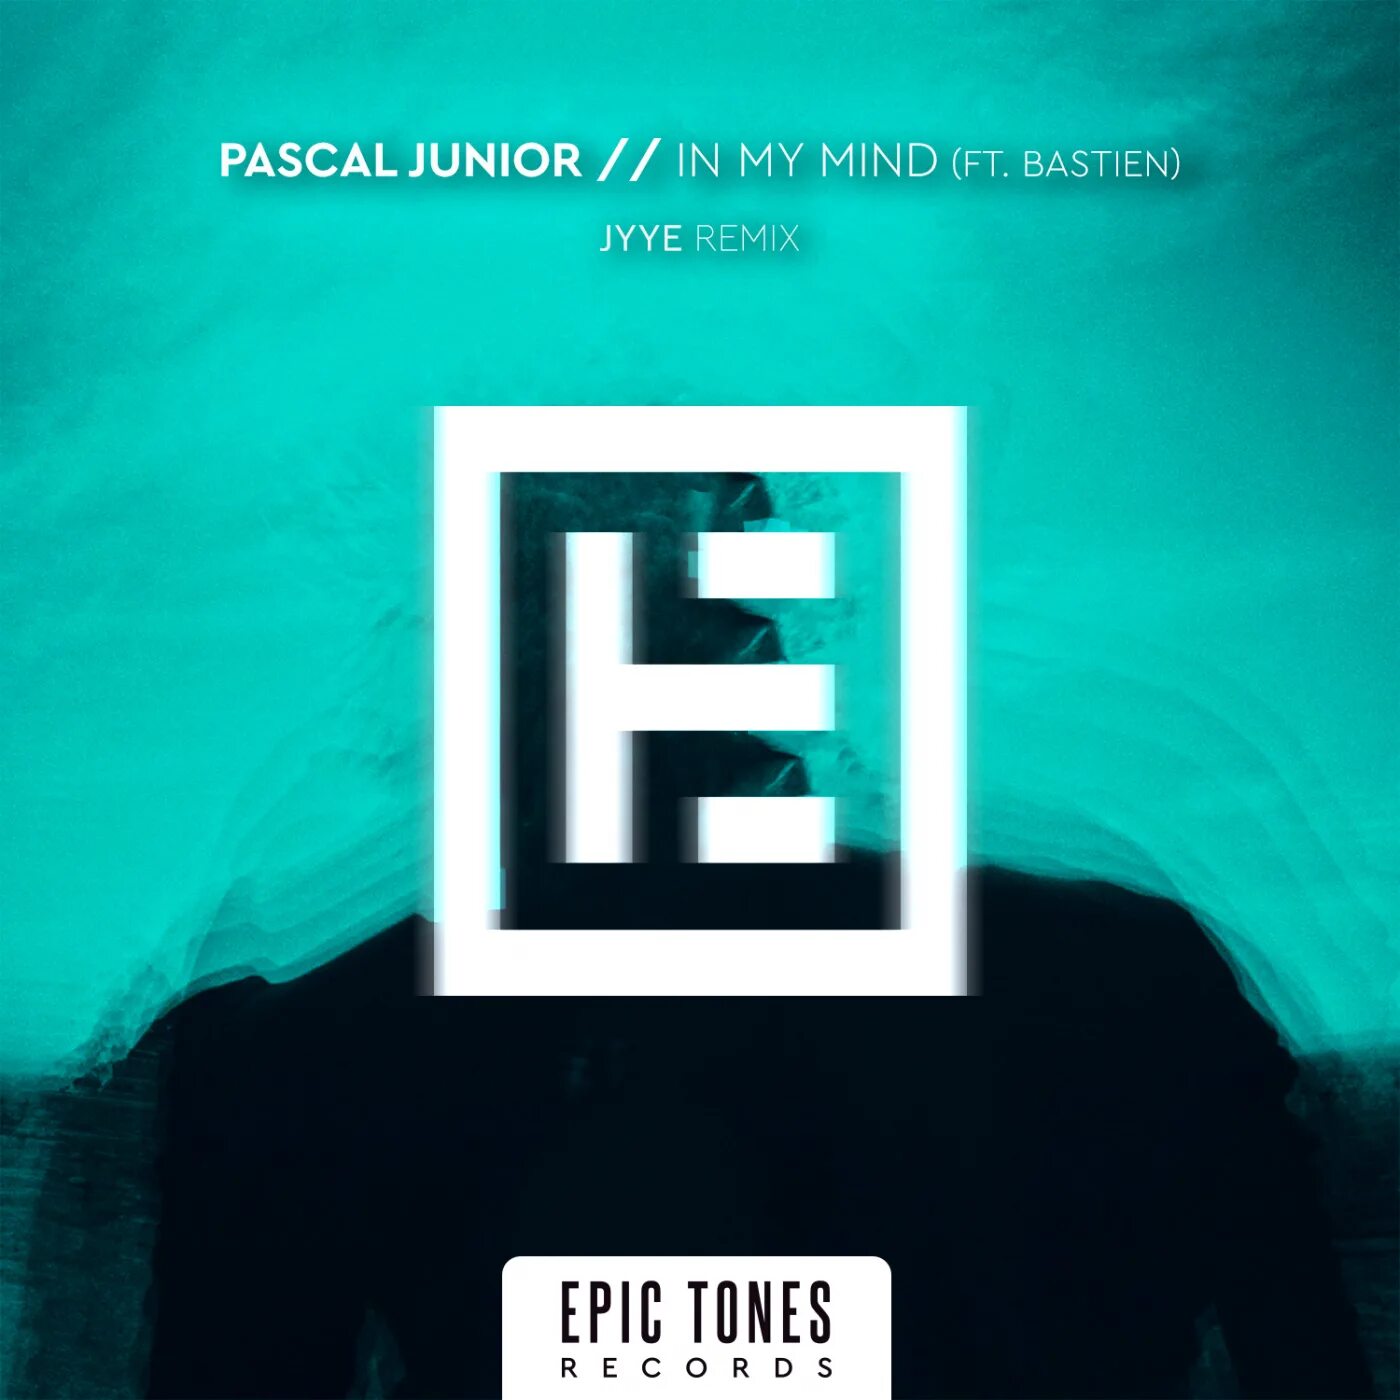 Pascal Junior. Pascal Junior, hot Pixels - feel you closer. Pascal Junior - in my Dreams. In my Mind.